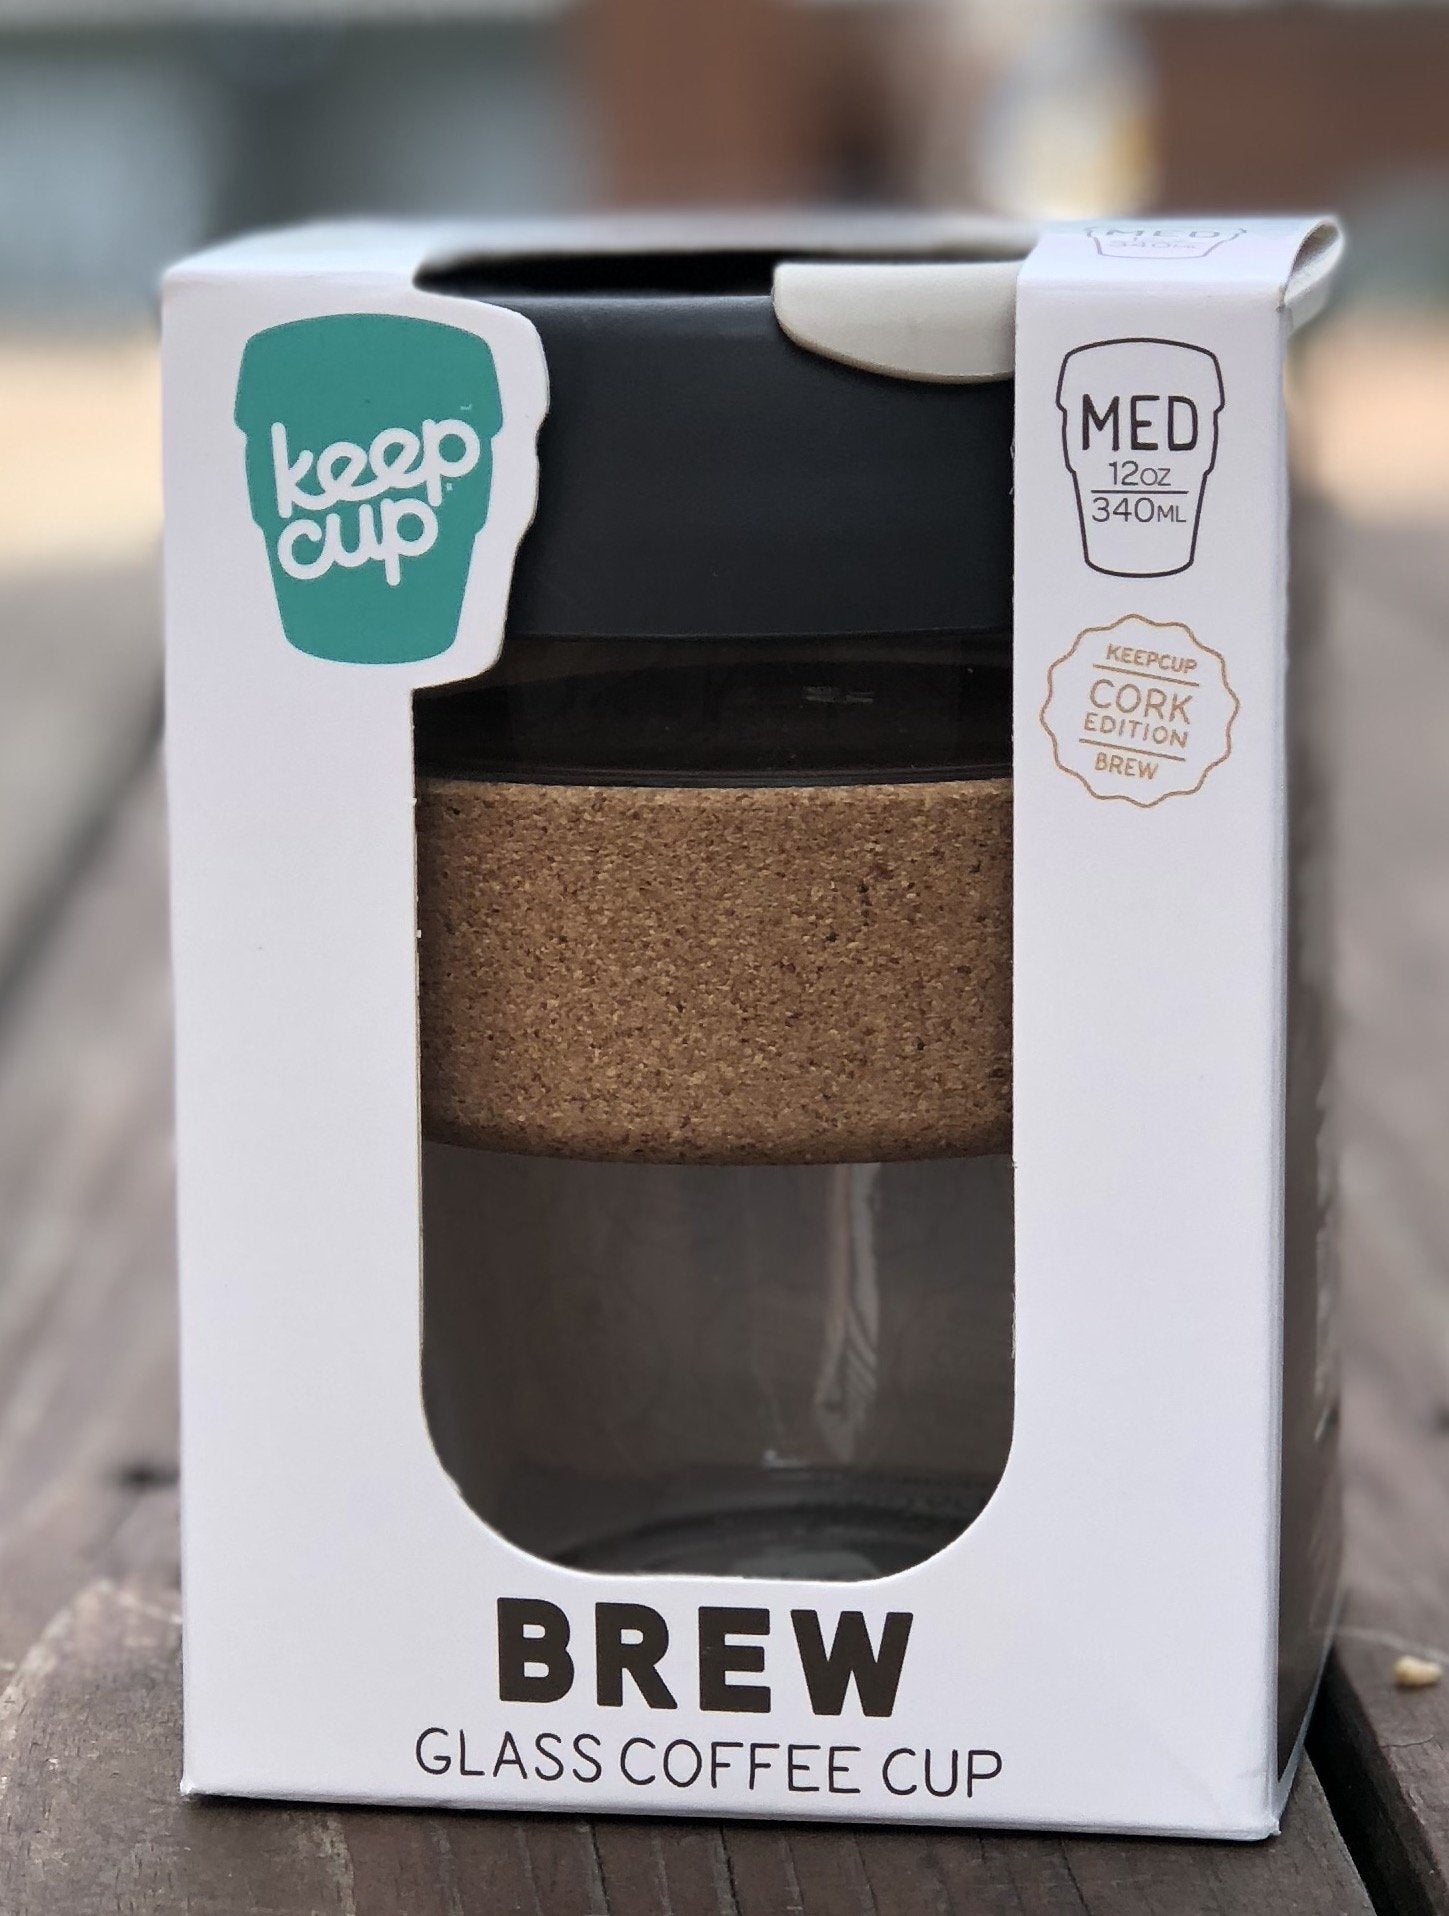 KeepCup Reusable Tempered Glass Coffee Cup | Travel Mug with Spill Proof  Lid, Brew Cork Band, Lightw…See more KeepCup Reusable Tempered Glass Coffee